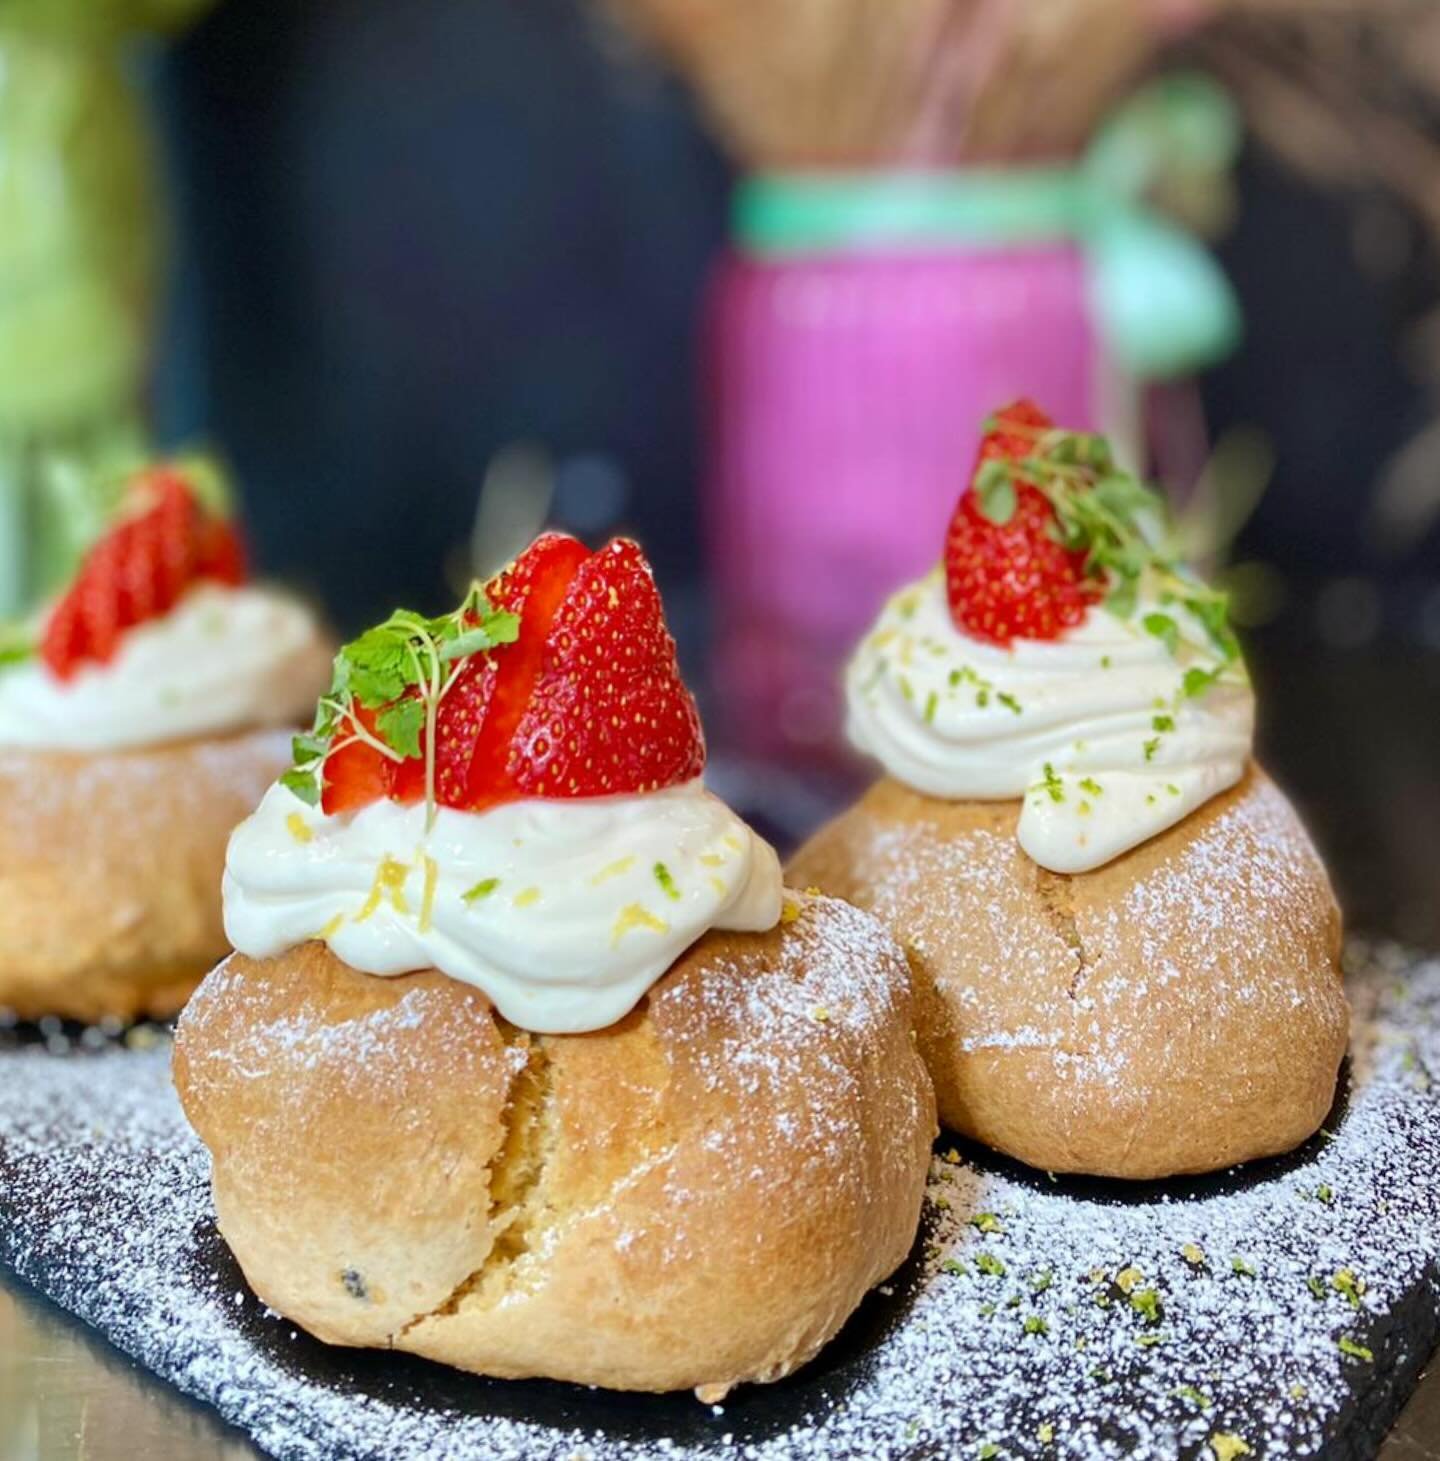 These aren&rsquo;t your average scones 👀🍓 this week we&rsquo;ve got passionfruit scones topped with strawberry mascarpone and fresh strawberries. 

On the table everyday until sell out! 

#brunch #brunchglasgow #glasgowfood #glasgowcafe #glasgowbak